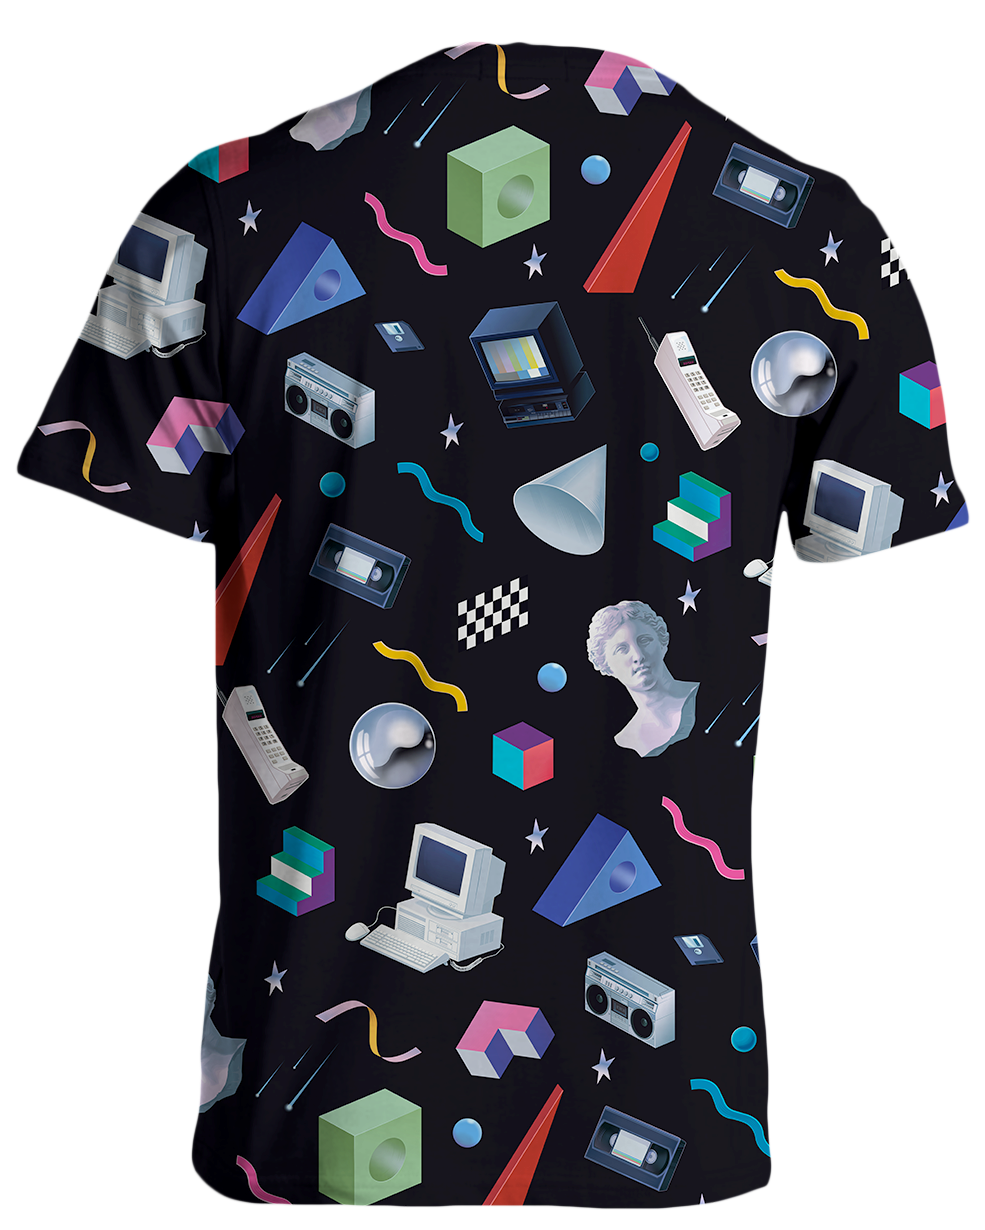 Shapes & Forms Tee